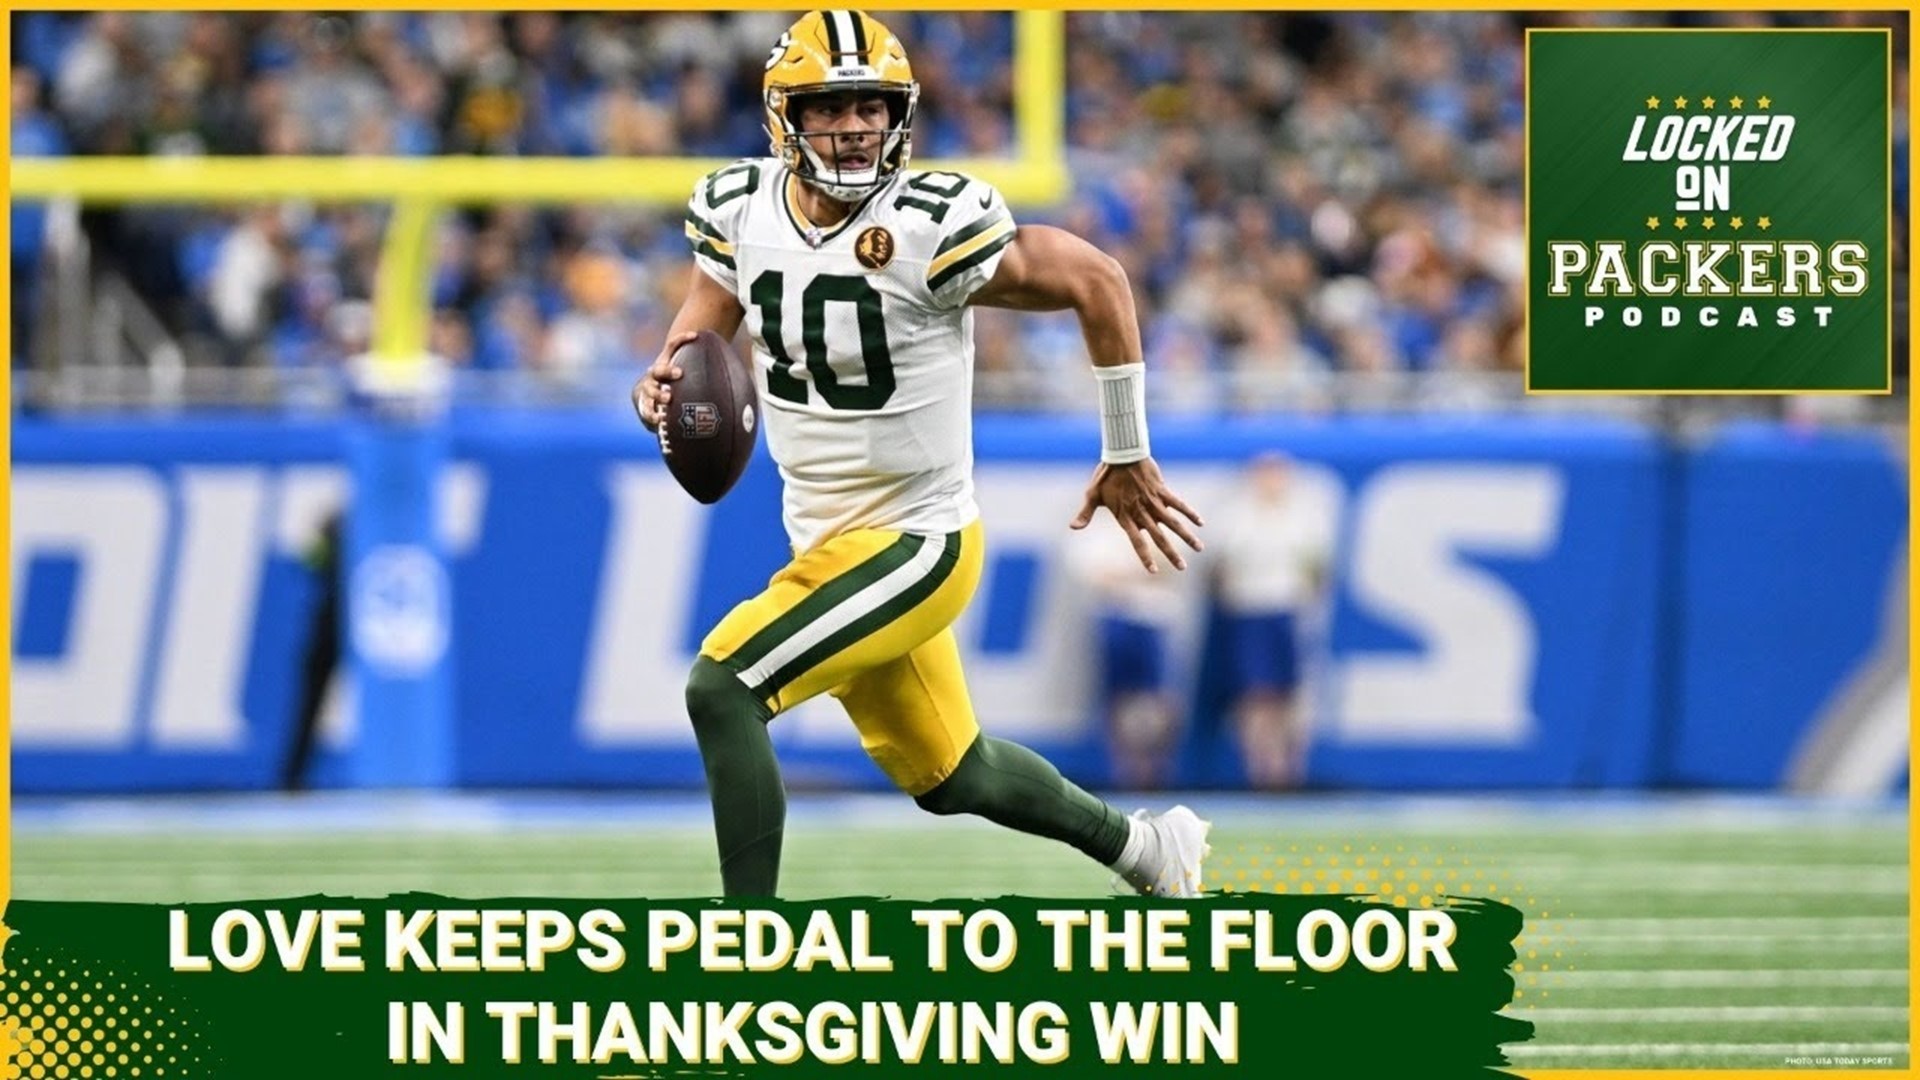 Jordan Love and the Packers came out on the first drive firing and never let up, earning a 29-22 win on Thanksgiving to keep their playoff hopes alive.